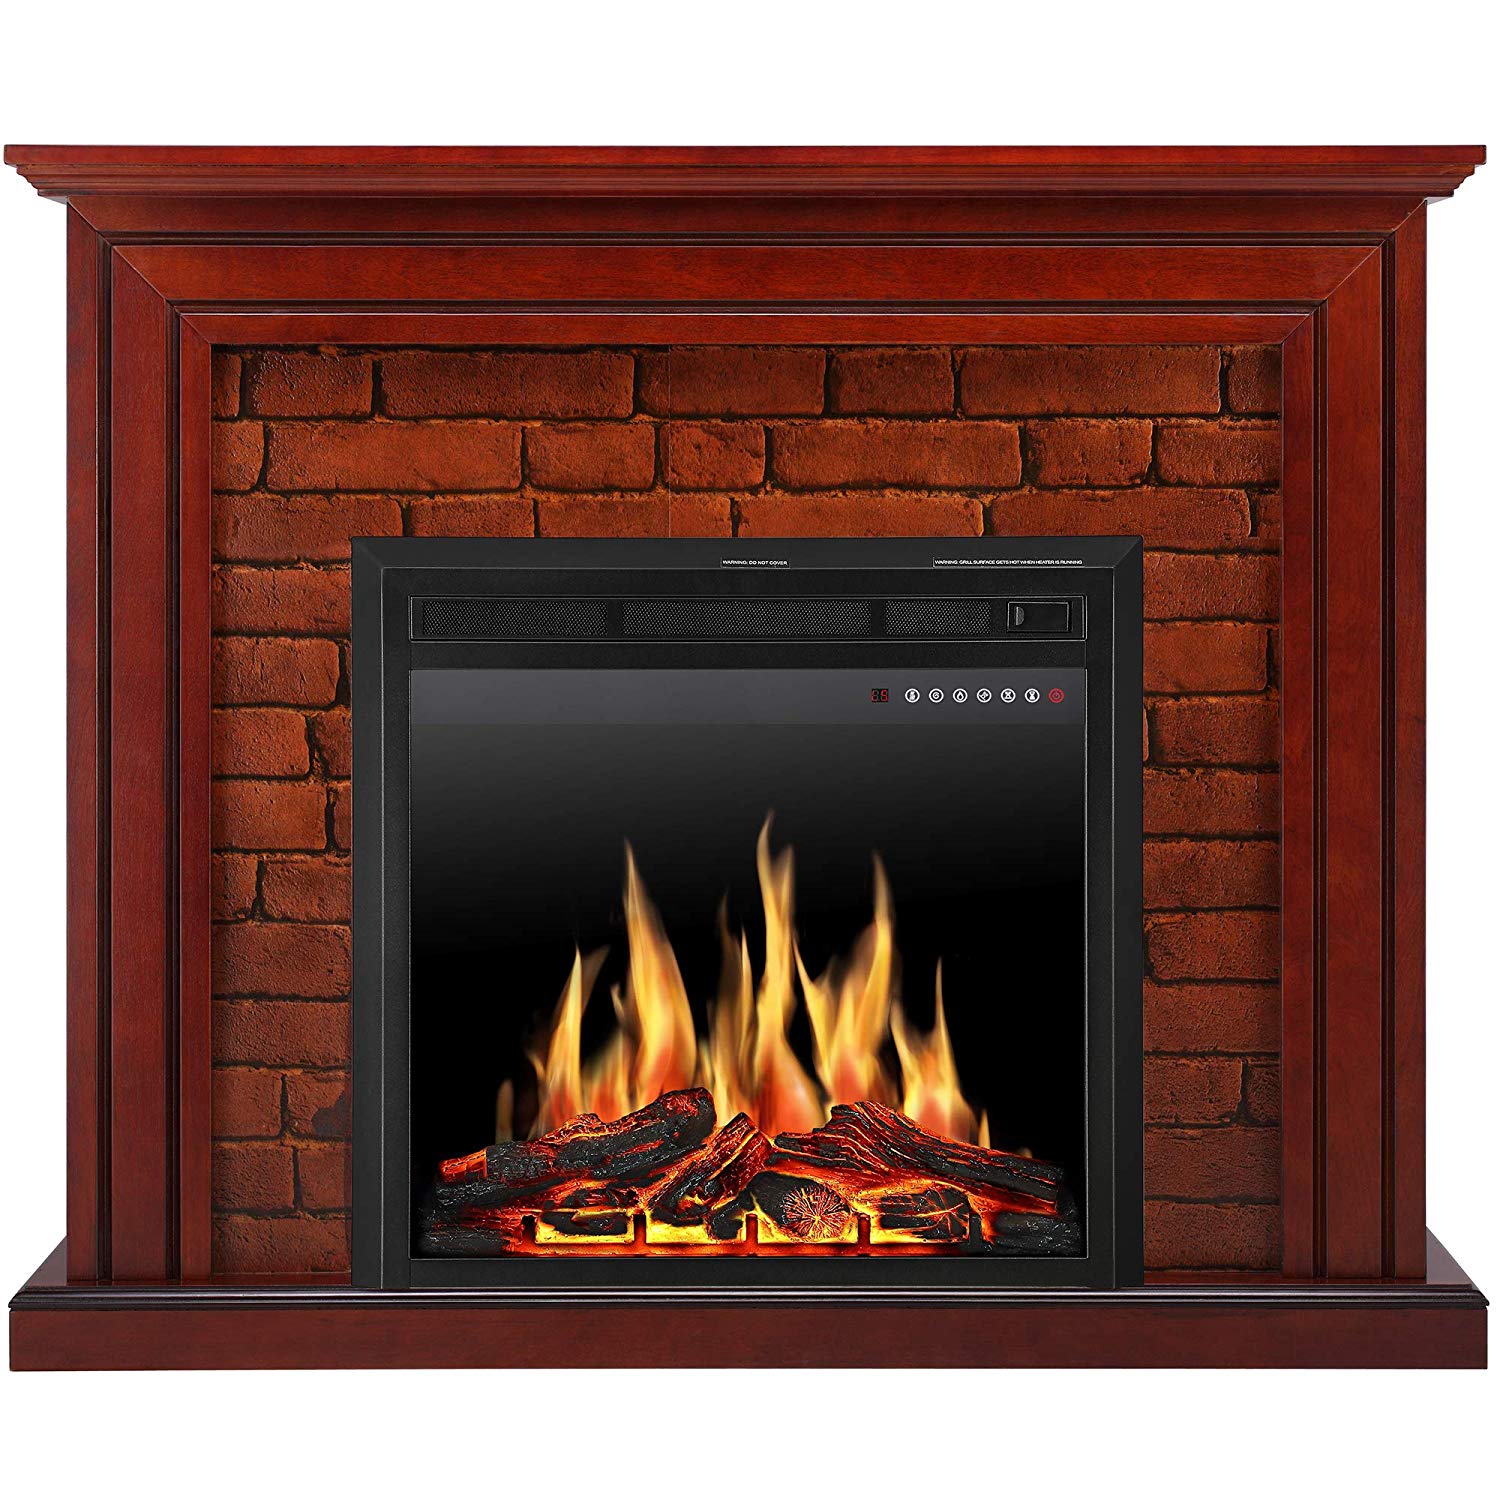 Black Electric Fireplace with Mantel Awesome Jamfly Electric Fireplace Mantel Package Traditional Brick Wall Design Heater with Remote Control and Led touch Screen Home Accent Furnishings